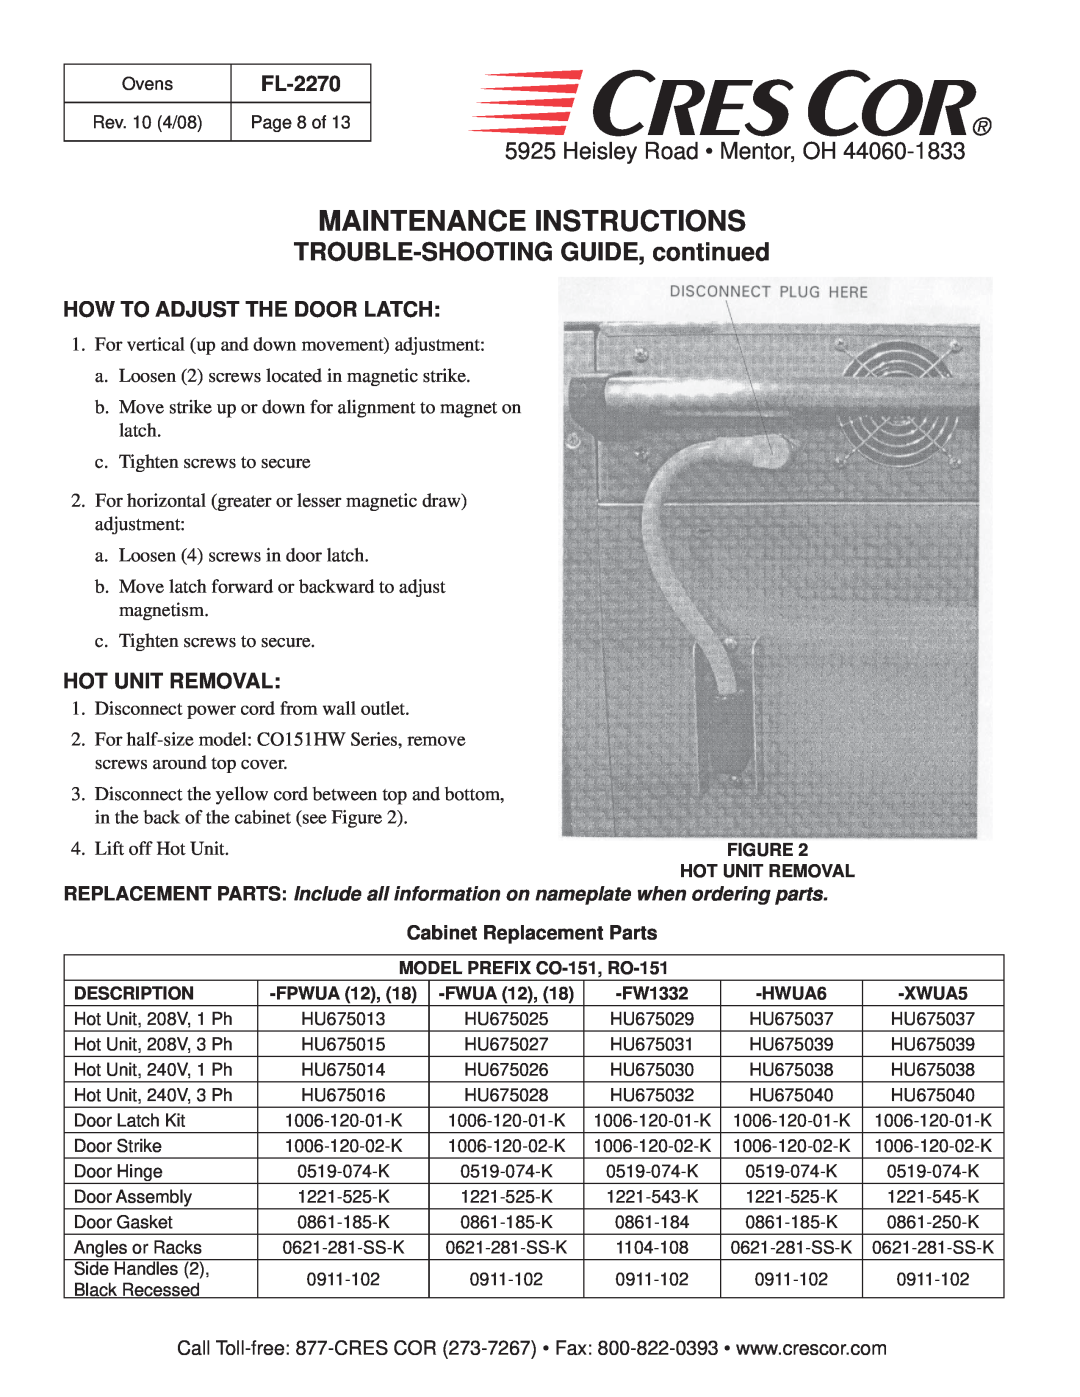 Cres Cor CO151FW1818B manual TROUBLE-SHOOTINGGUIDE, continued, Maintenance Instructions, Heisley Road Mentor, OH, FL-2270 